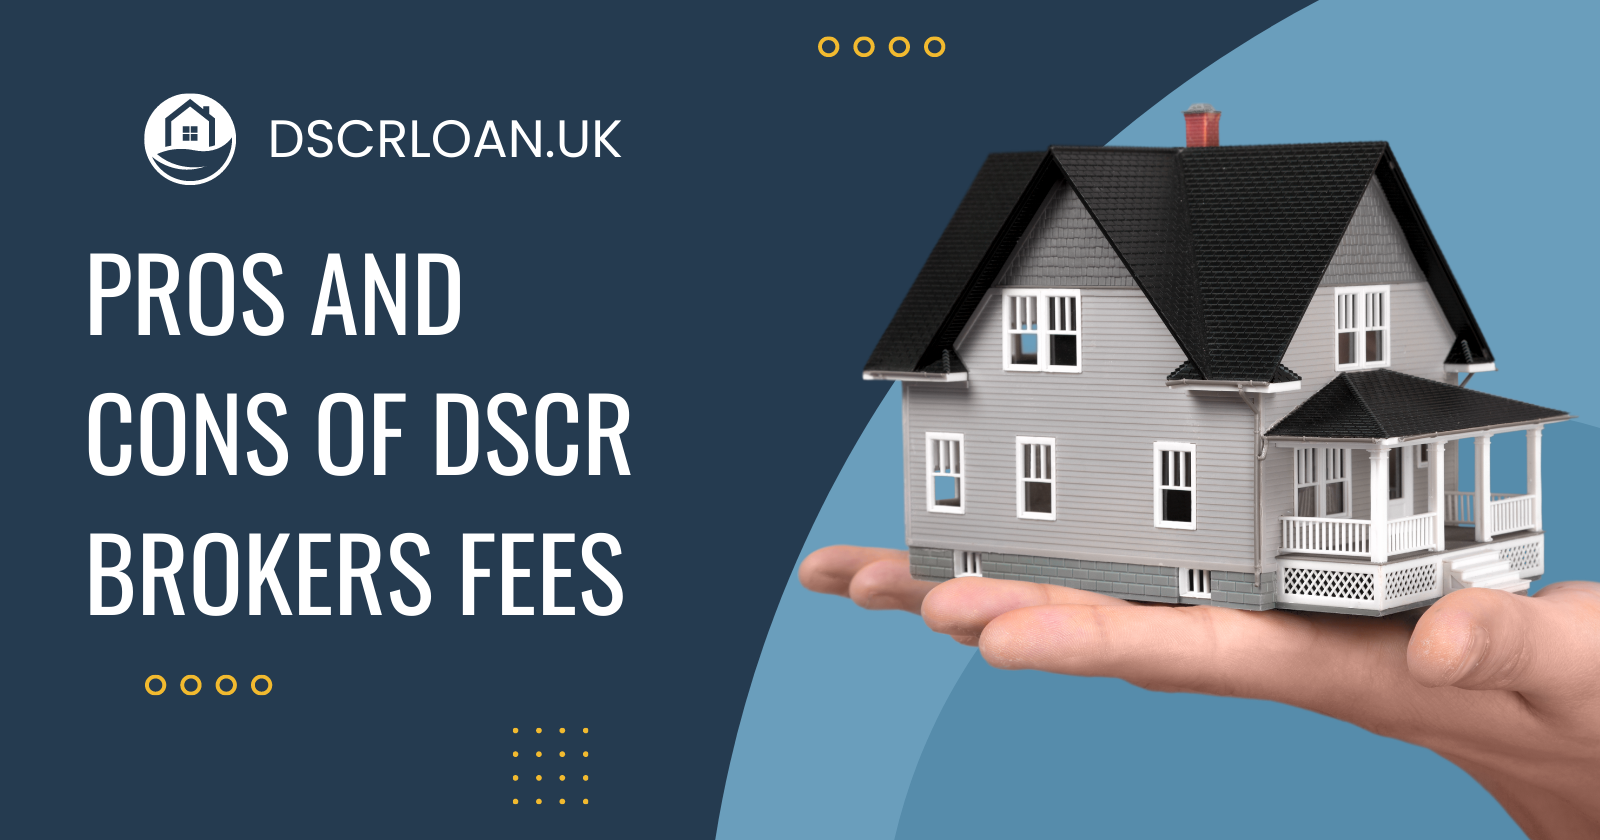 weighing dscr broker fee pros and cons